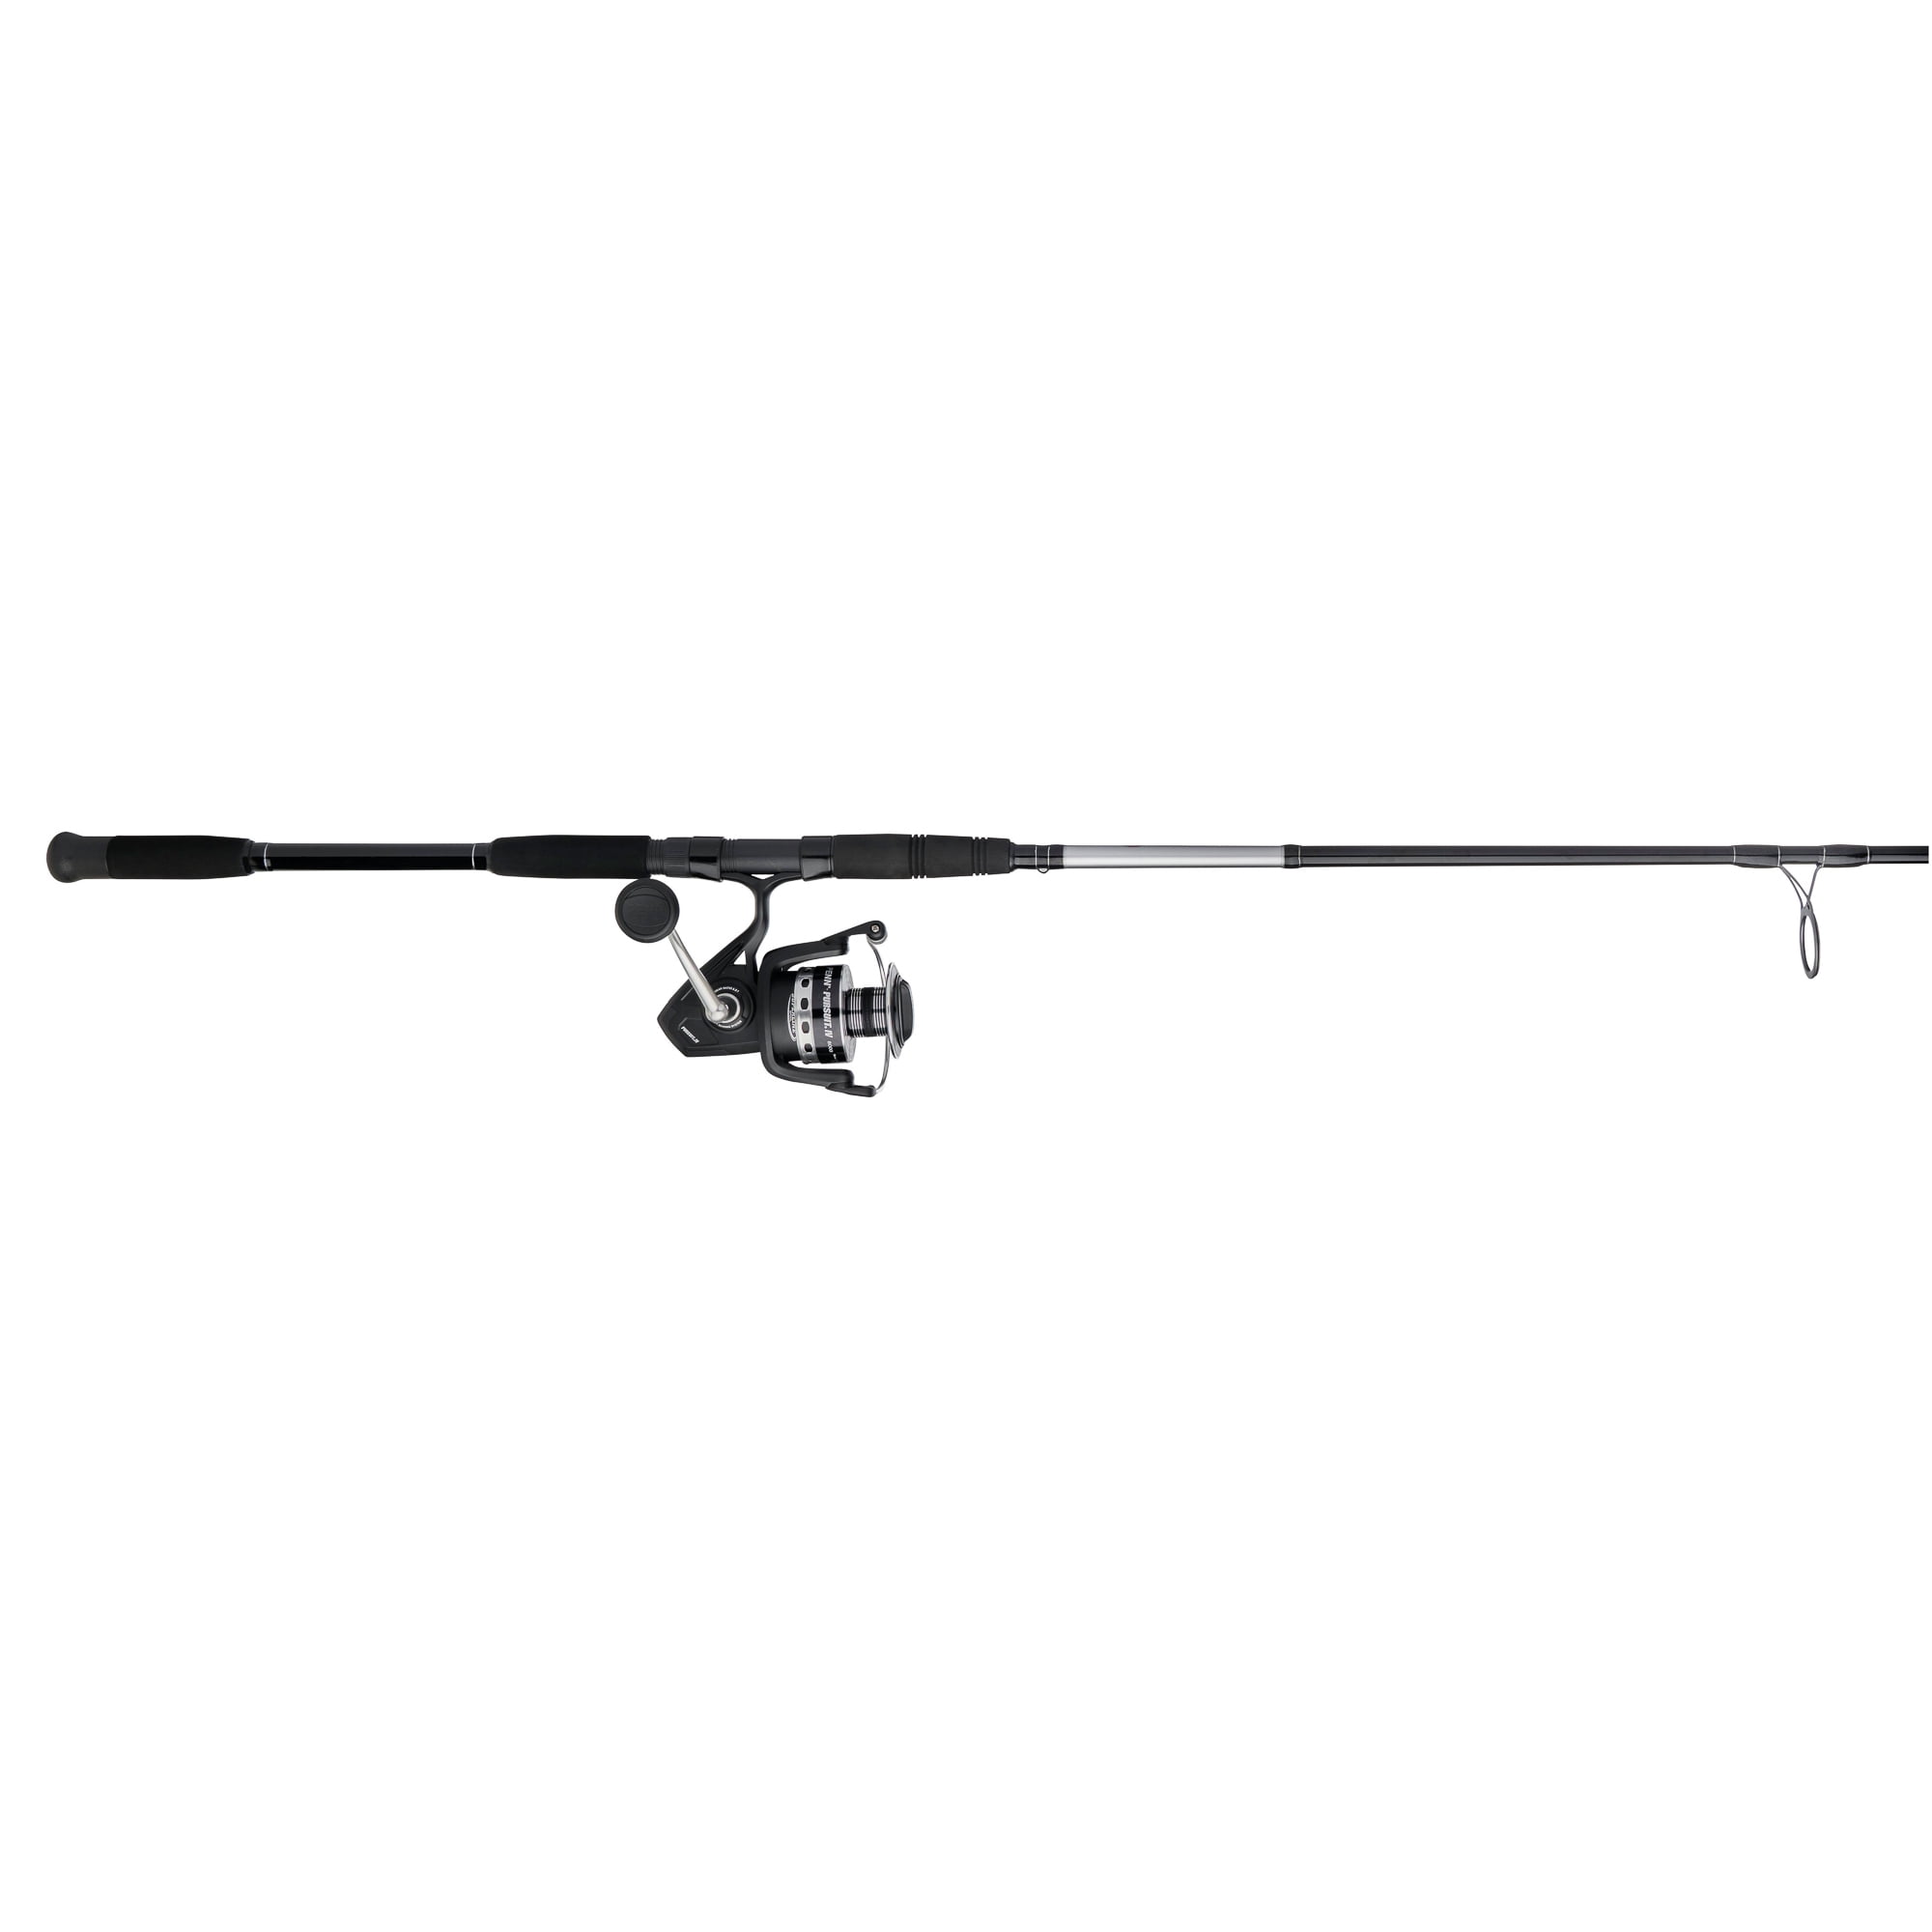 2 Penn Pursuit III Surf Spinning Rod 10 Foot Length #puriii2040s102h for sale online 